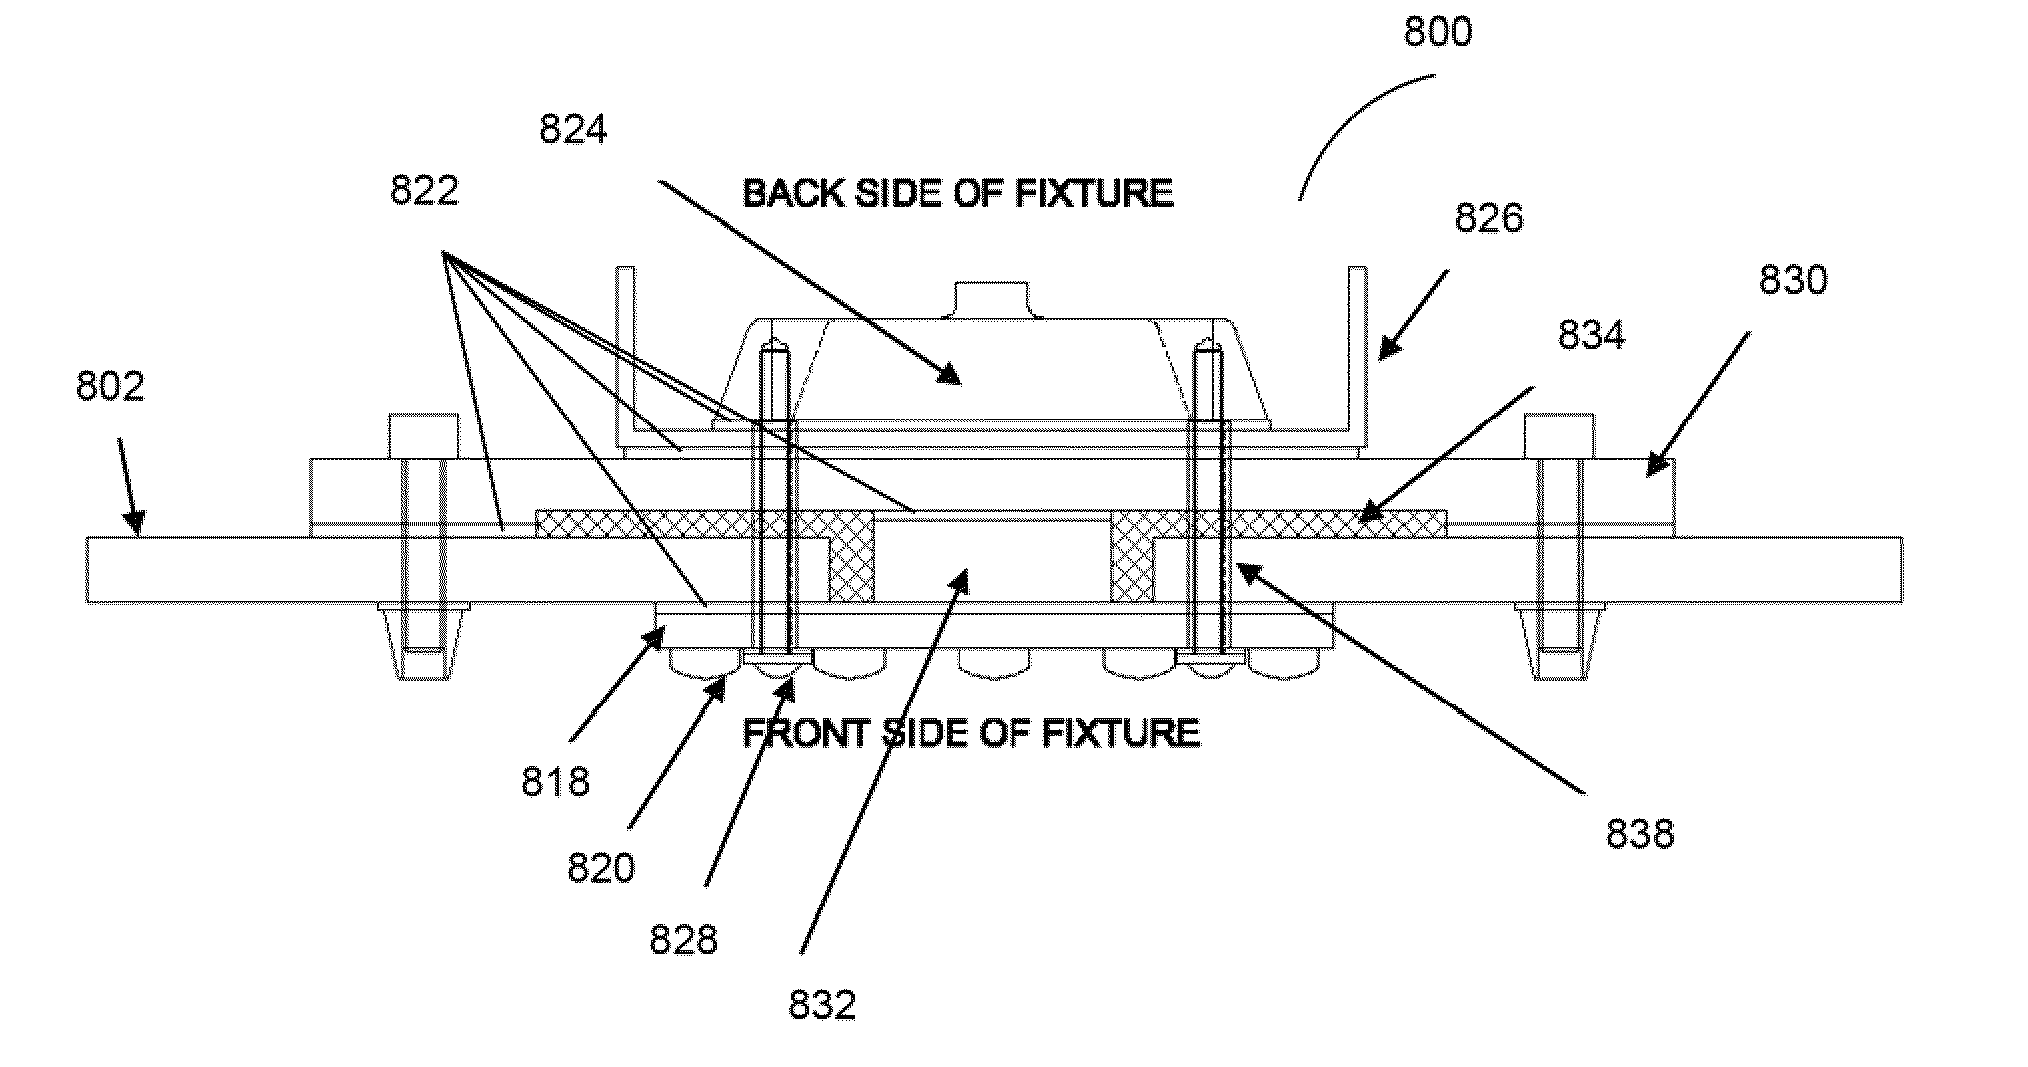 Solid-state lighting apparatus